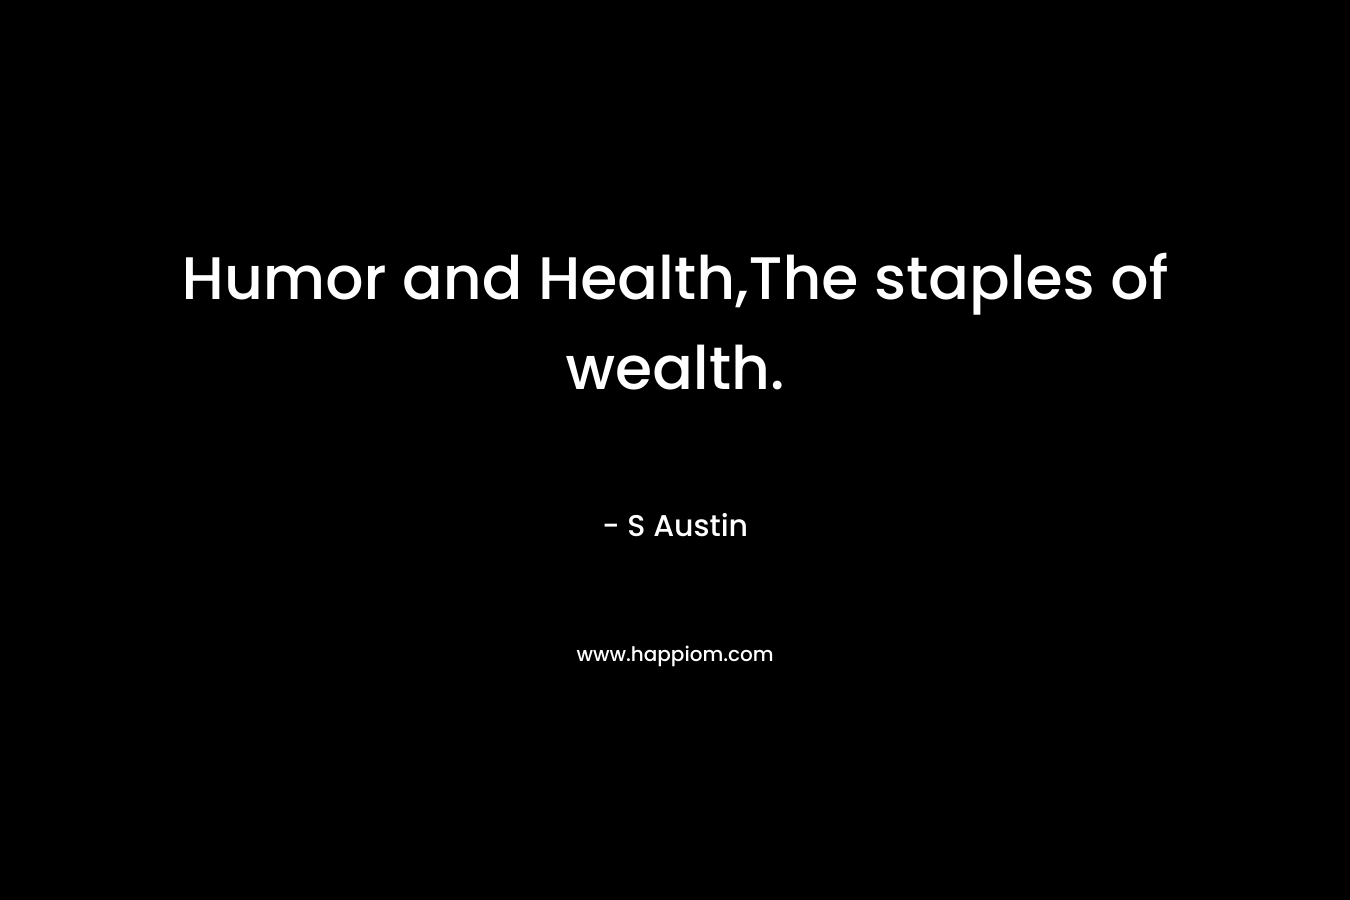 Humor and Health,The staples of wealth.